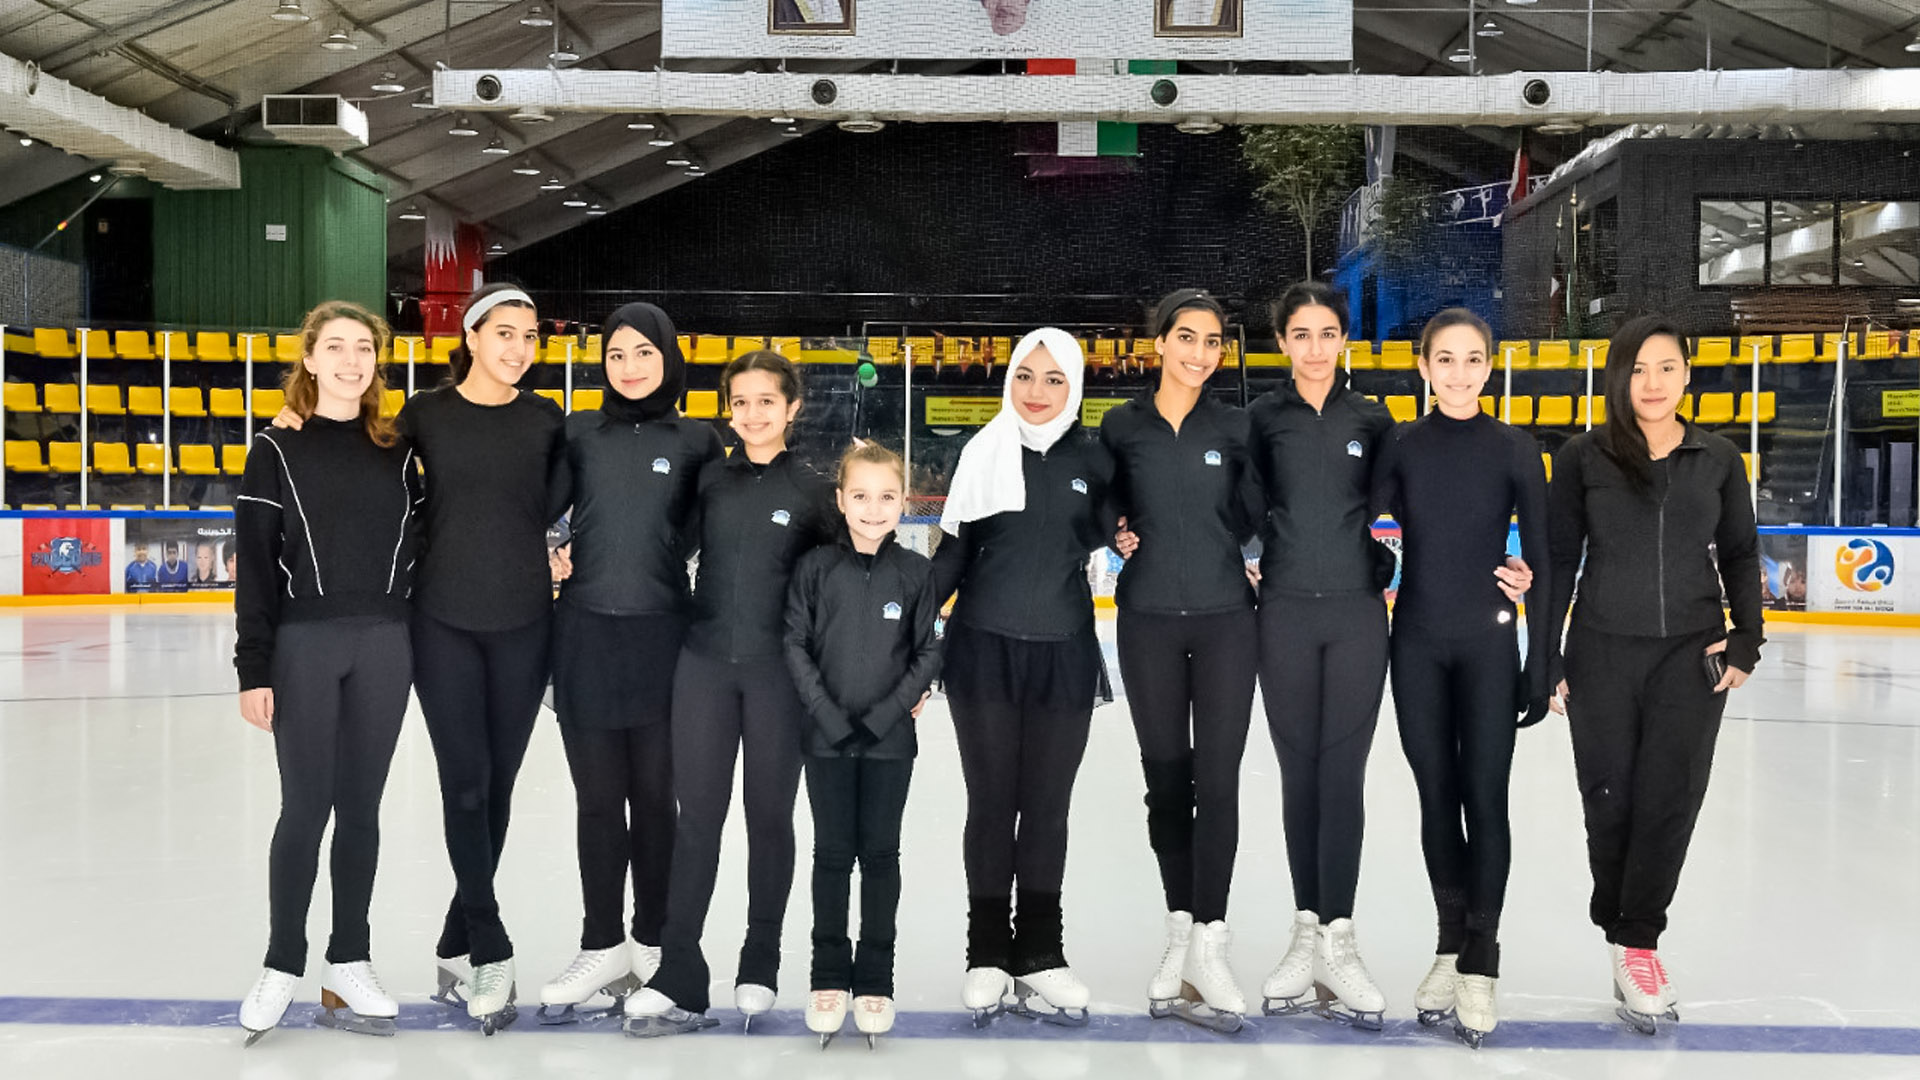 Three Kuwaiti figure skaters win gold medals in Dubai competition